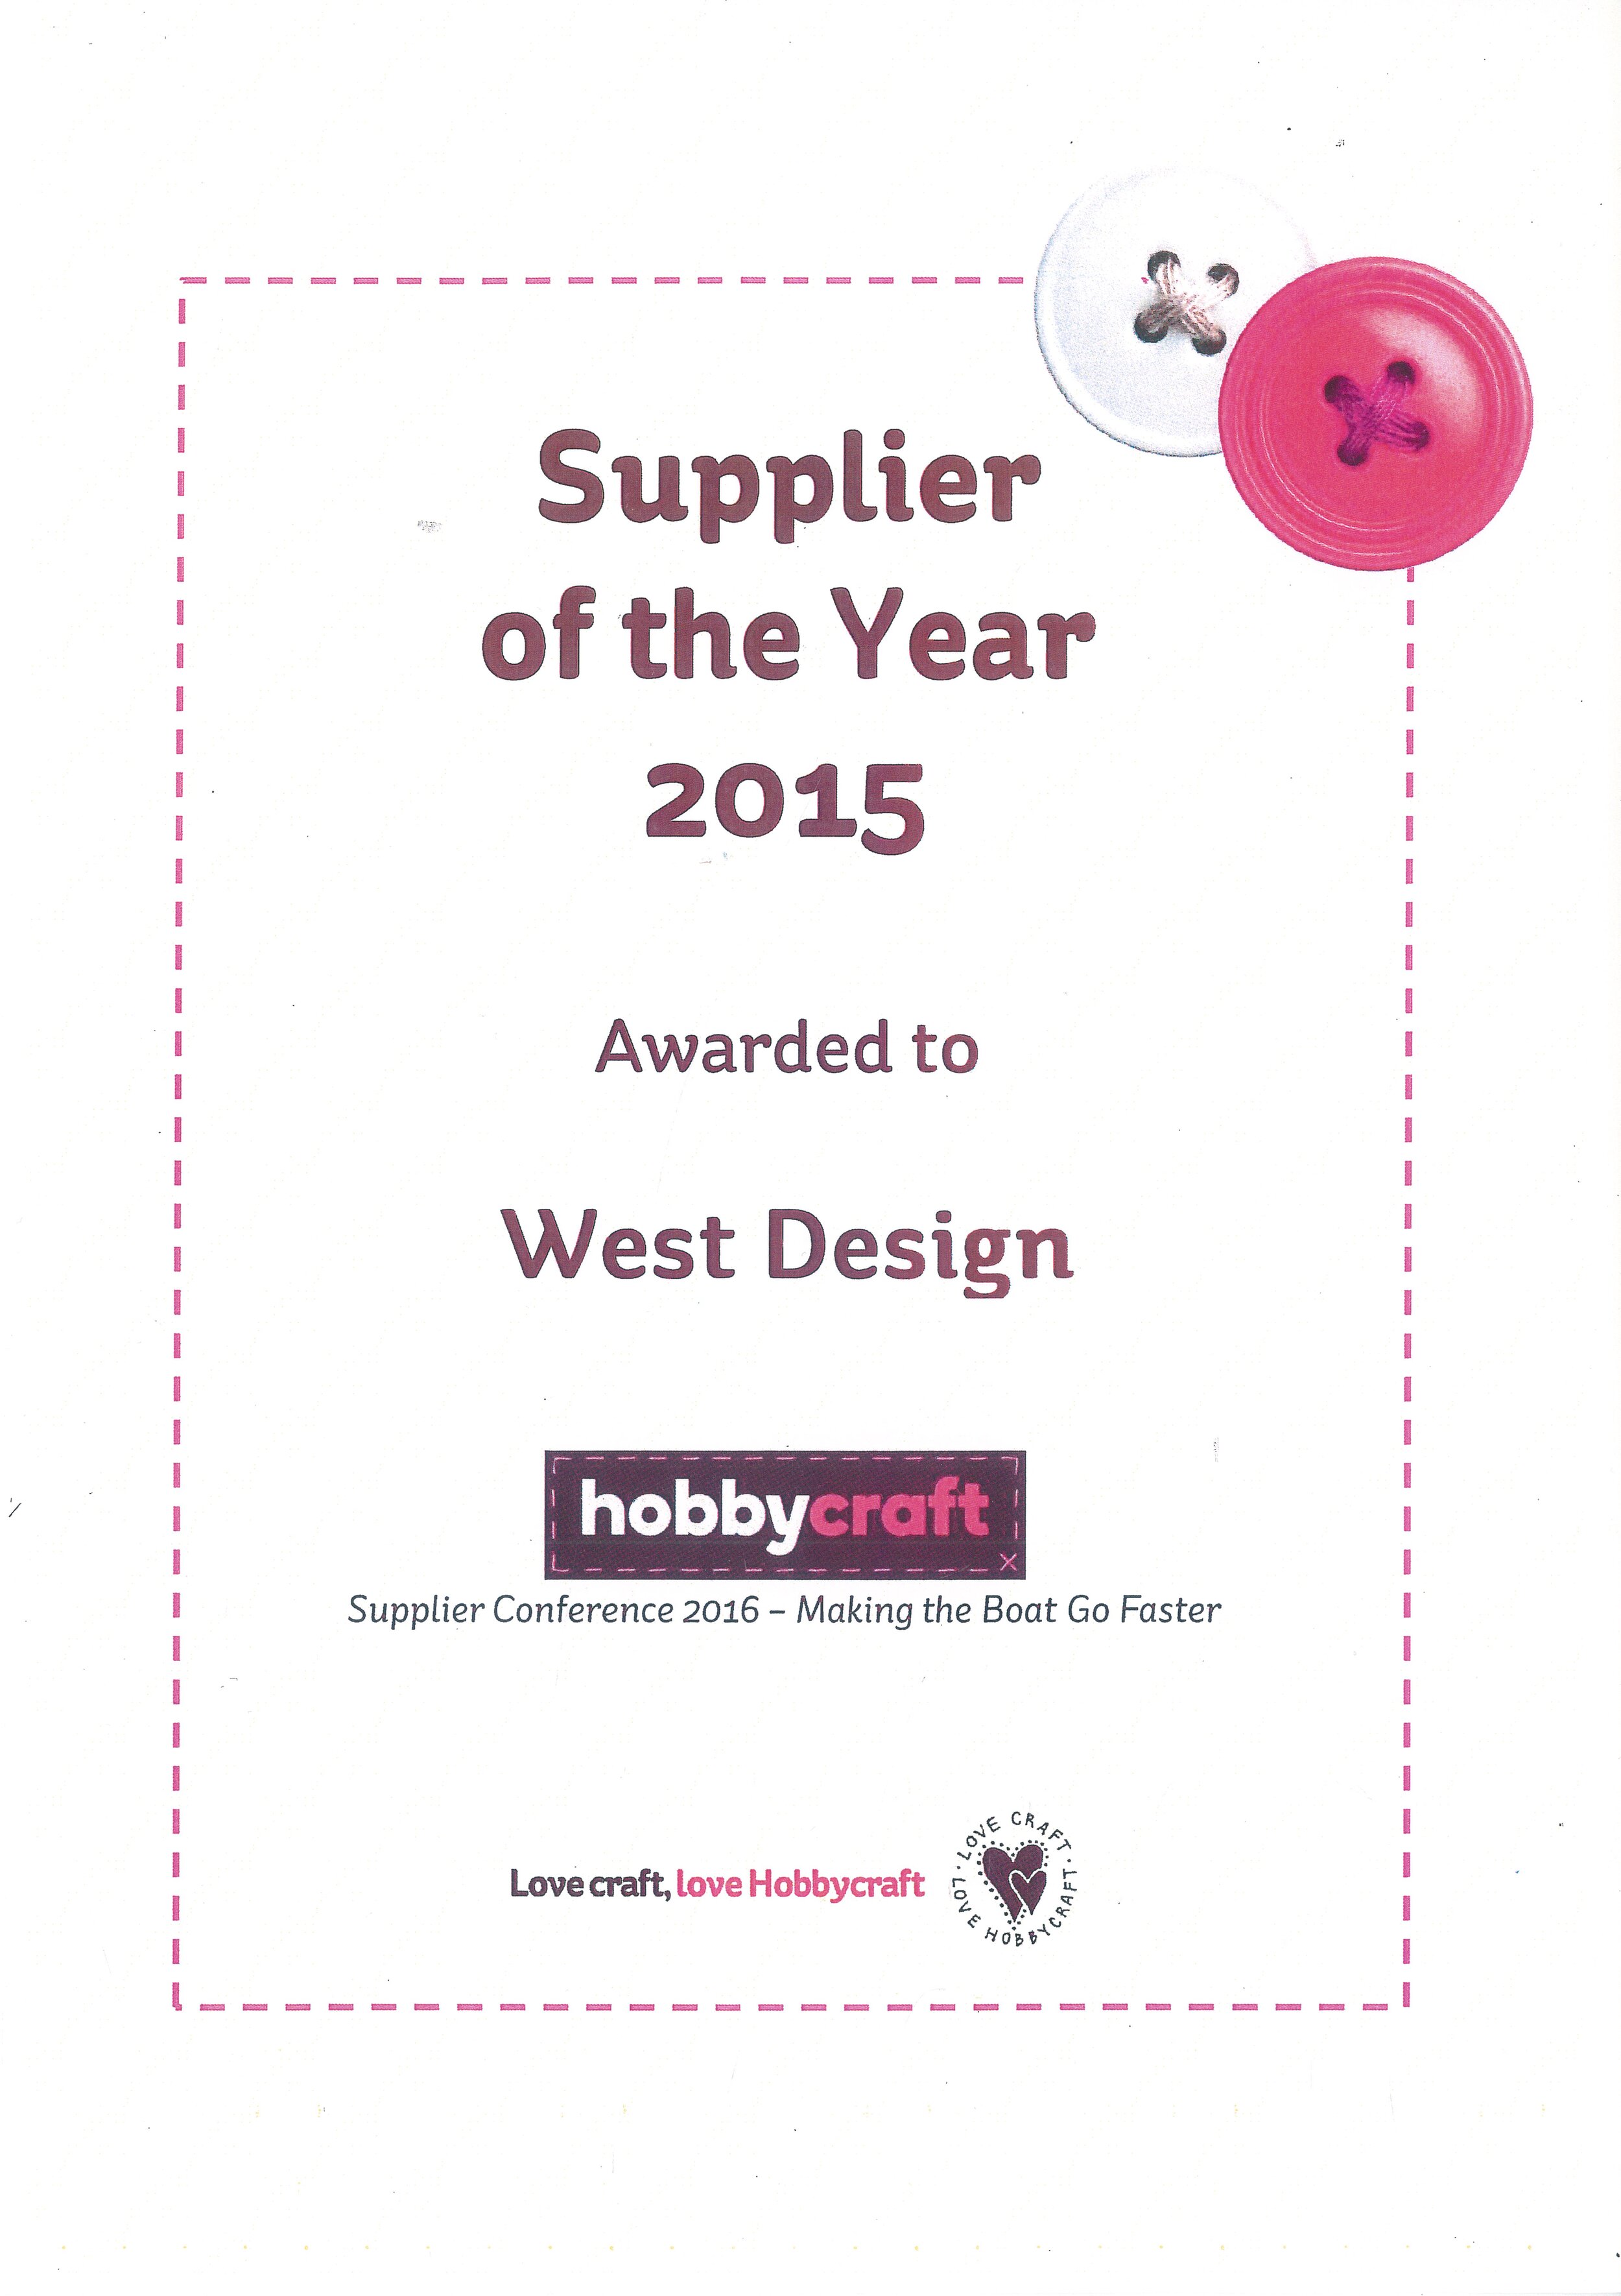 Supplier of the Year - Hobbycraft Awards, 2015